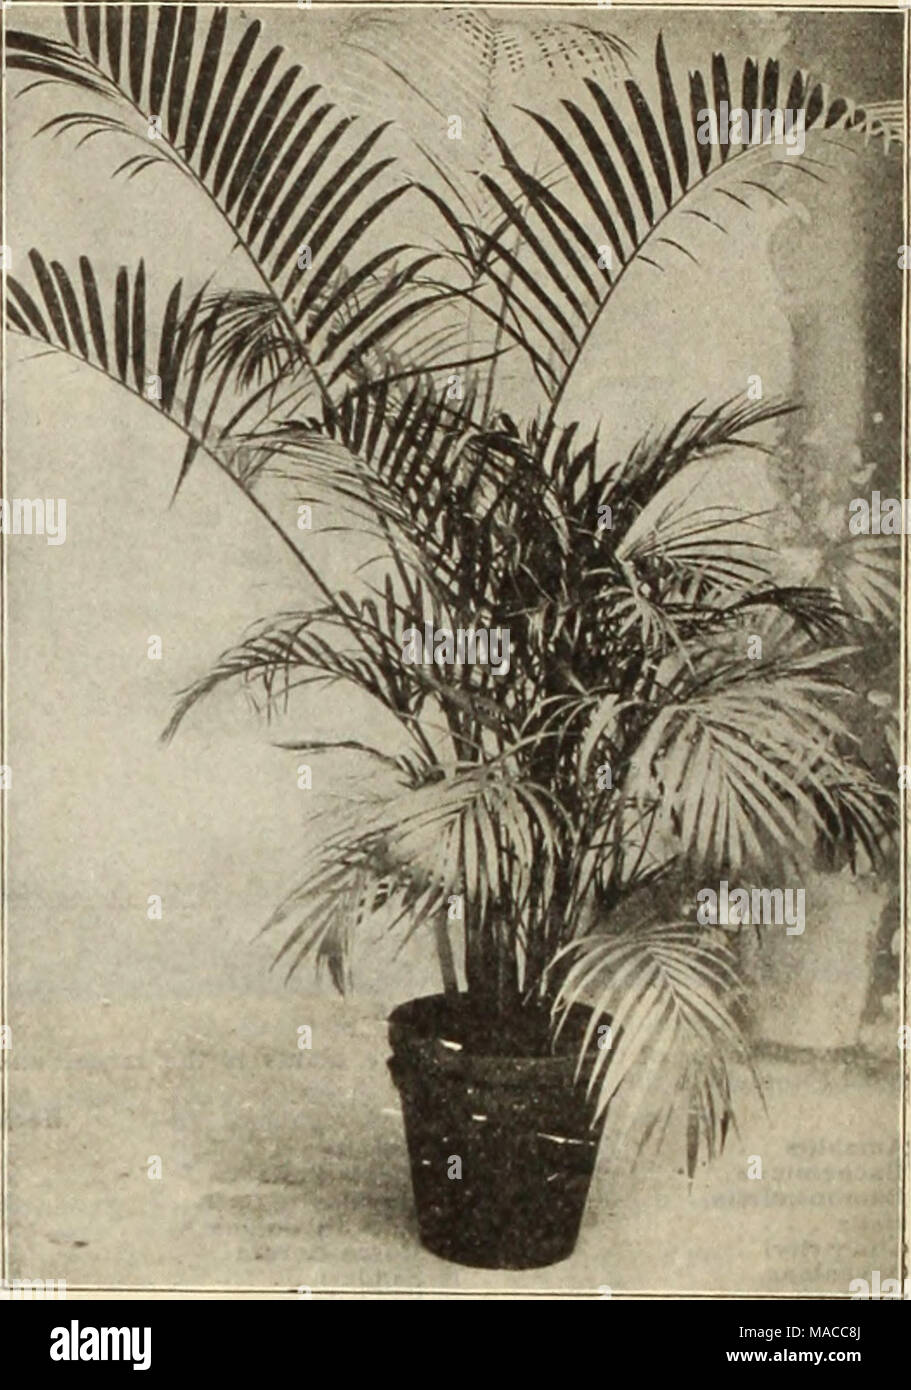 . Dreer's wholesale price list : bulbs for florists plants for florists flower seeds for florists fungicides, fertilizers, insecticides, implements, etc . COCOS WEDDELIANA ARECA LUTESCENS Caryota Blancoll. A rare variety of the Fish-tail Palm. 3-inch pots, $1.50 per doz.; $10.00 per 100. Caryota Urens. 2'/4-inch pots, $1.25 per doz.; $8.no per 100. Chamcedora Elegans. 3-inch pots, $1.50 per doz.: $10.00 per 100. Cocos Flexuosus and Plumosus. Extensively used in parts of California and Louisiana foront-d'oor planting, and also valuable for decorative purposes. 2'/4-inch pots, $1.50 per doz.;$10 Stock Photo